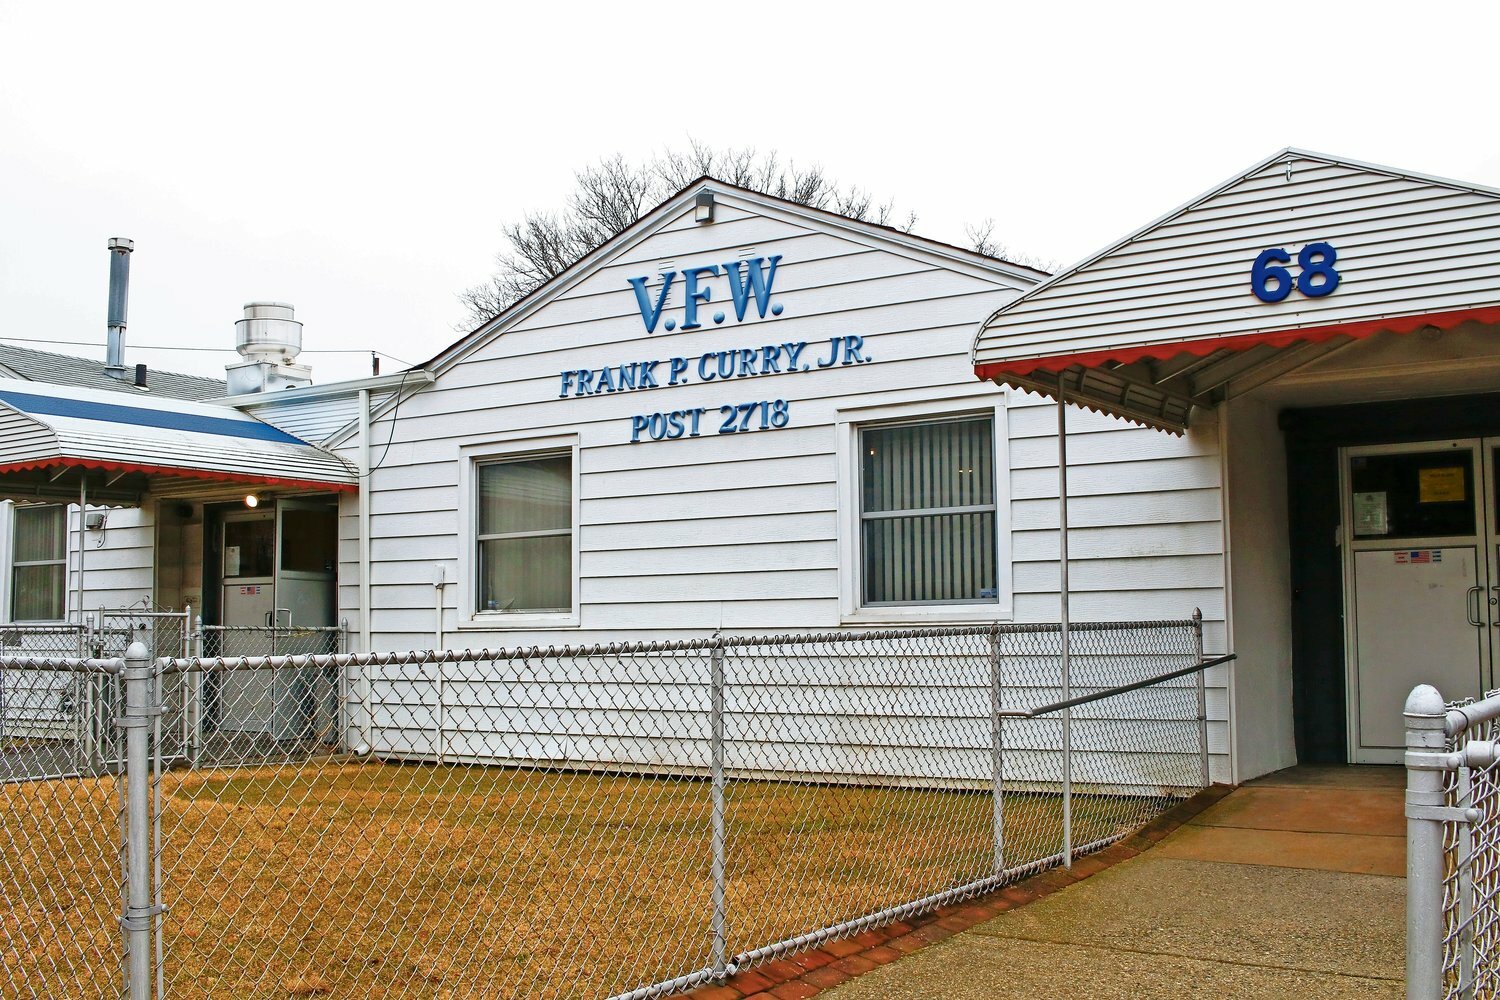 Gina and Vincent Centauro, of Rescuing Families Inc., are renovating the Frank P. Curry Jr. VFW Post 2718 in Franklin Square. They plan to upgrade both the interior and exterior of the building next year to make it a gathering space that local veterans and community members deserve.